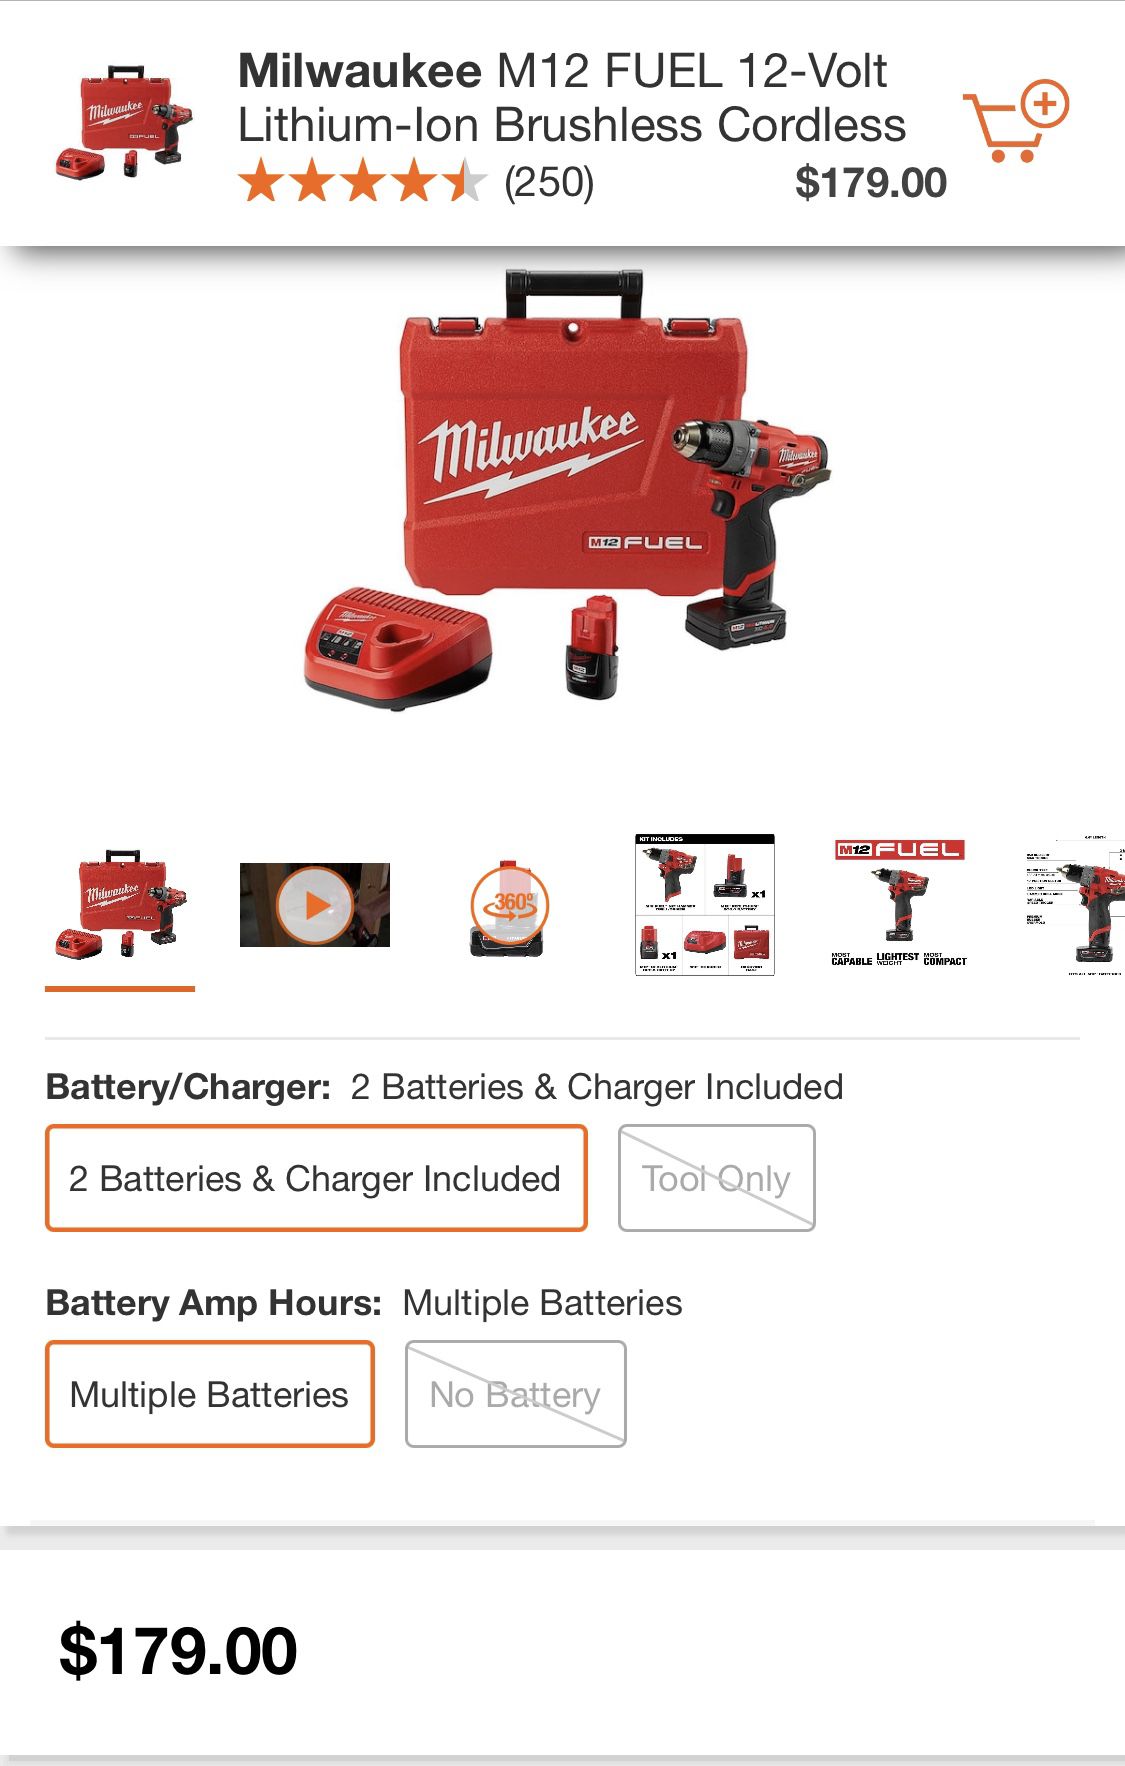 Milwaukee M12 Fuel Hammer Drill @ M12 1/2” Ratchet  Comes With 2 Batteries And Charger With Soft Bag Included   $400 Value !!!